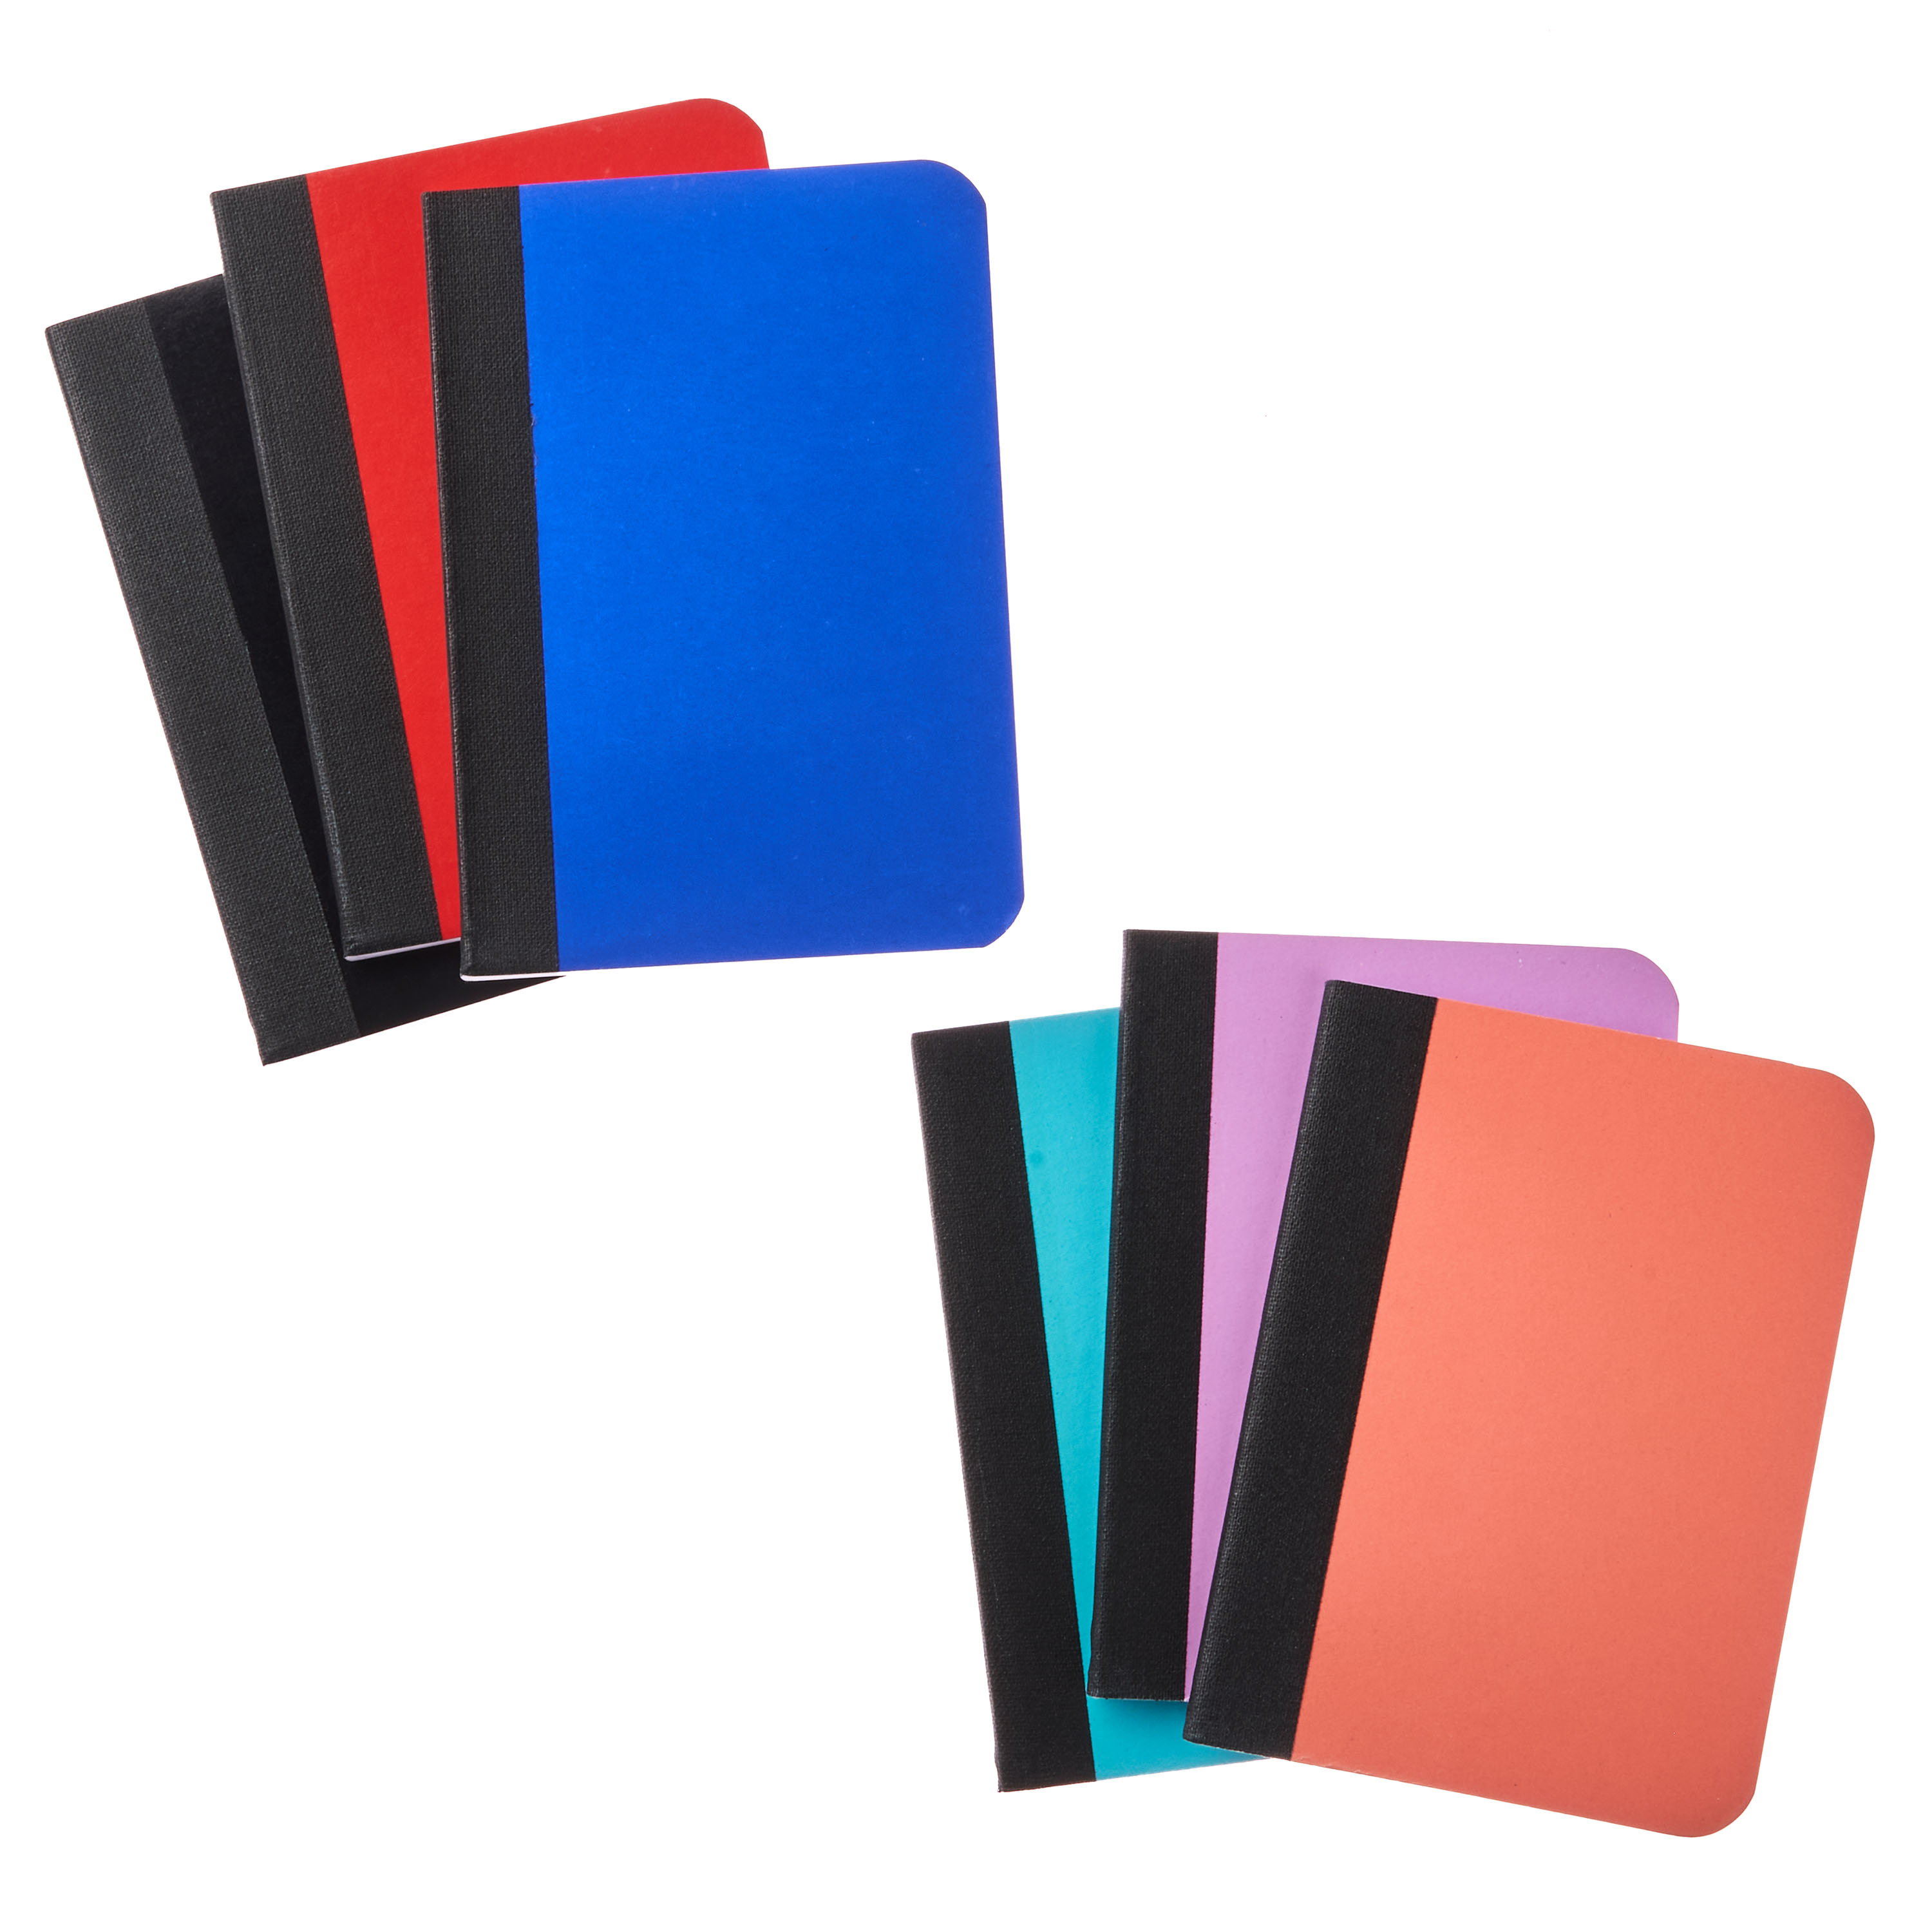 Pen + Gear 3-Pack Mini Composition Book, 3.25" x 4.5" x 4.55", 80 Sheets, Black, Blue and Red - image 3 of 5